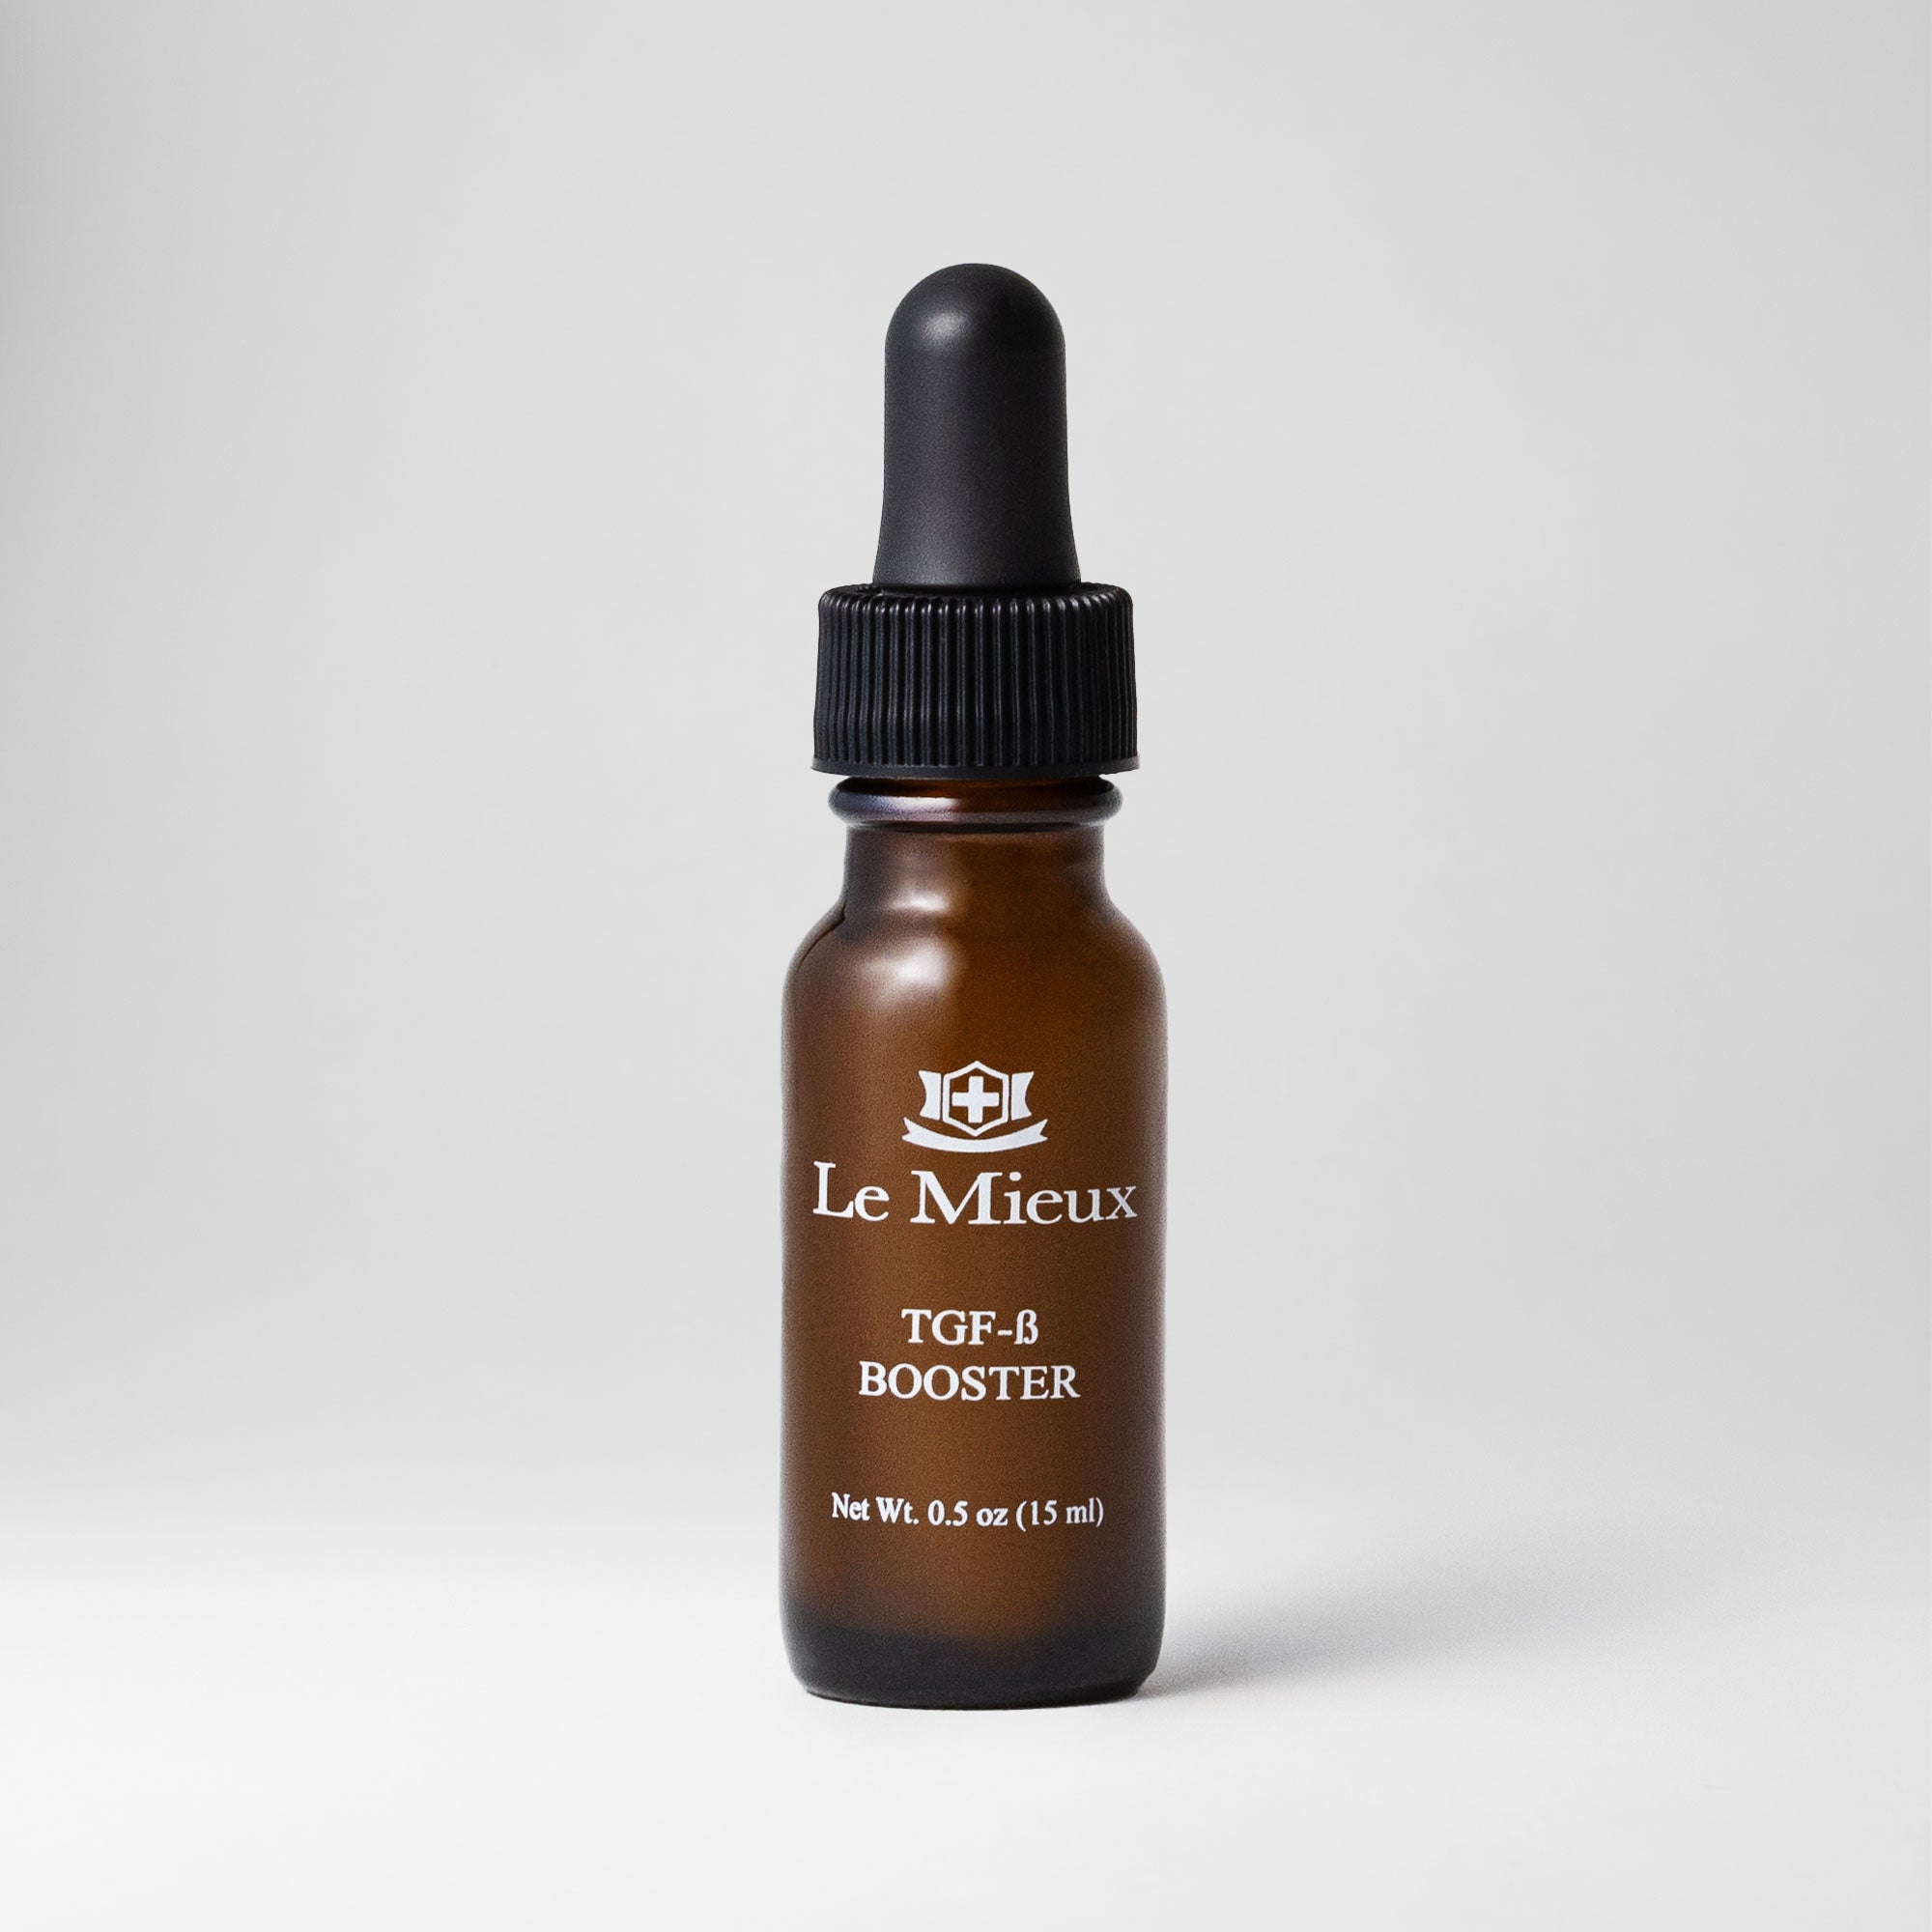  TGF-β BOOSTER from Le Mieux Skincare - 5